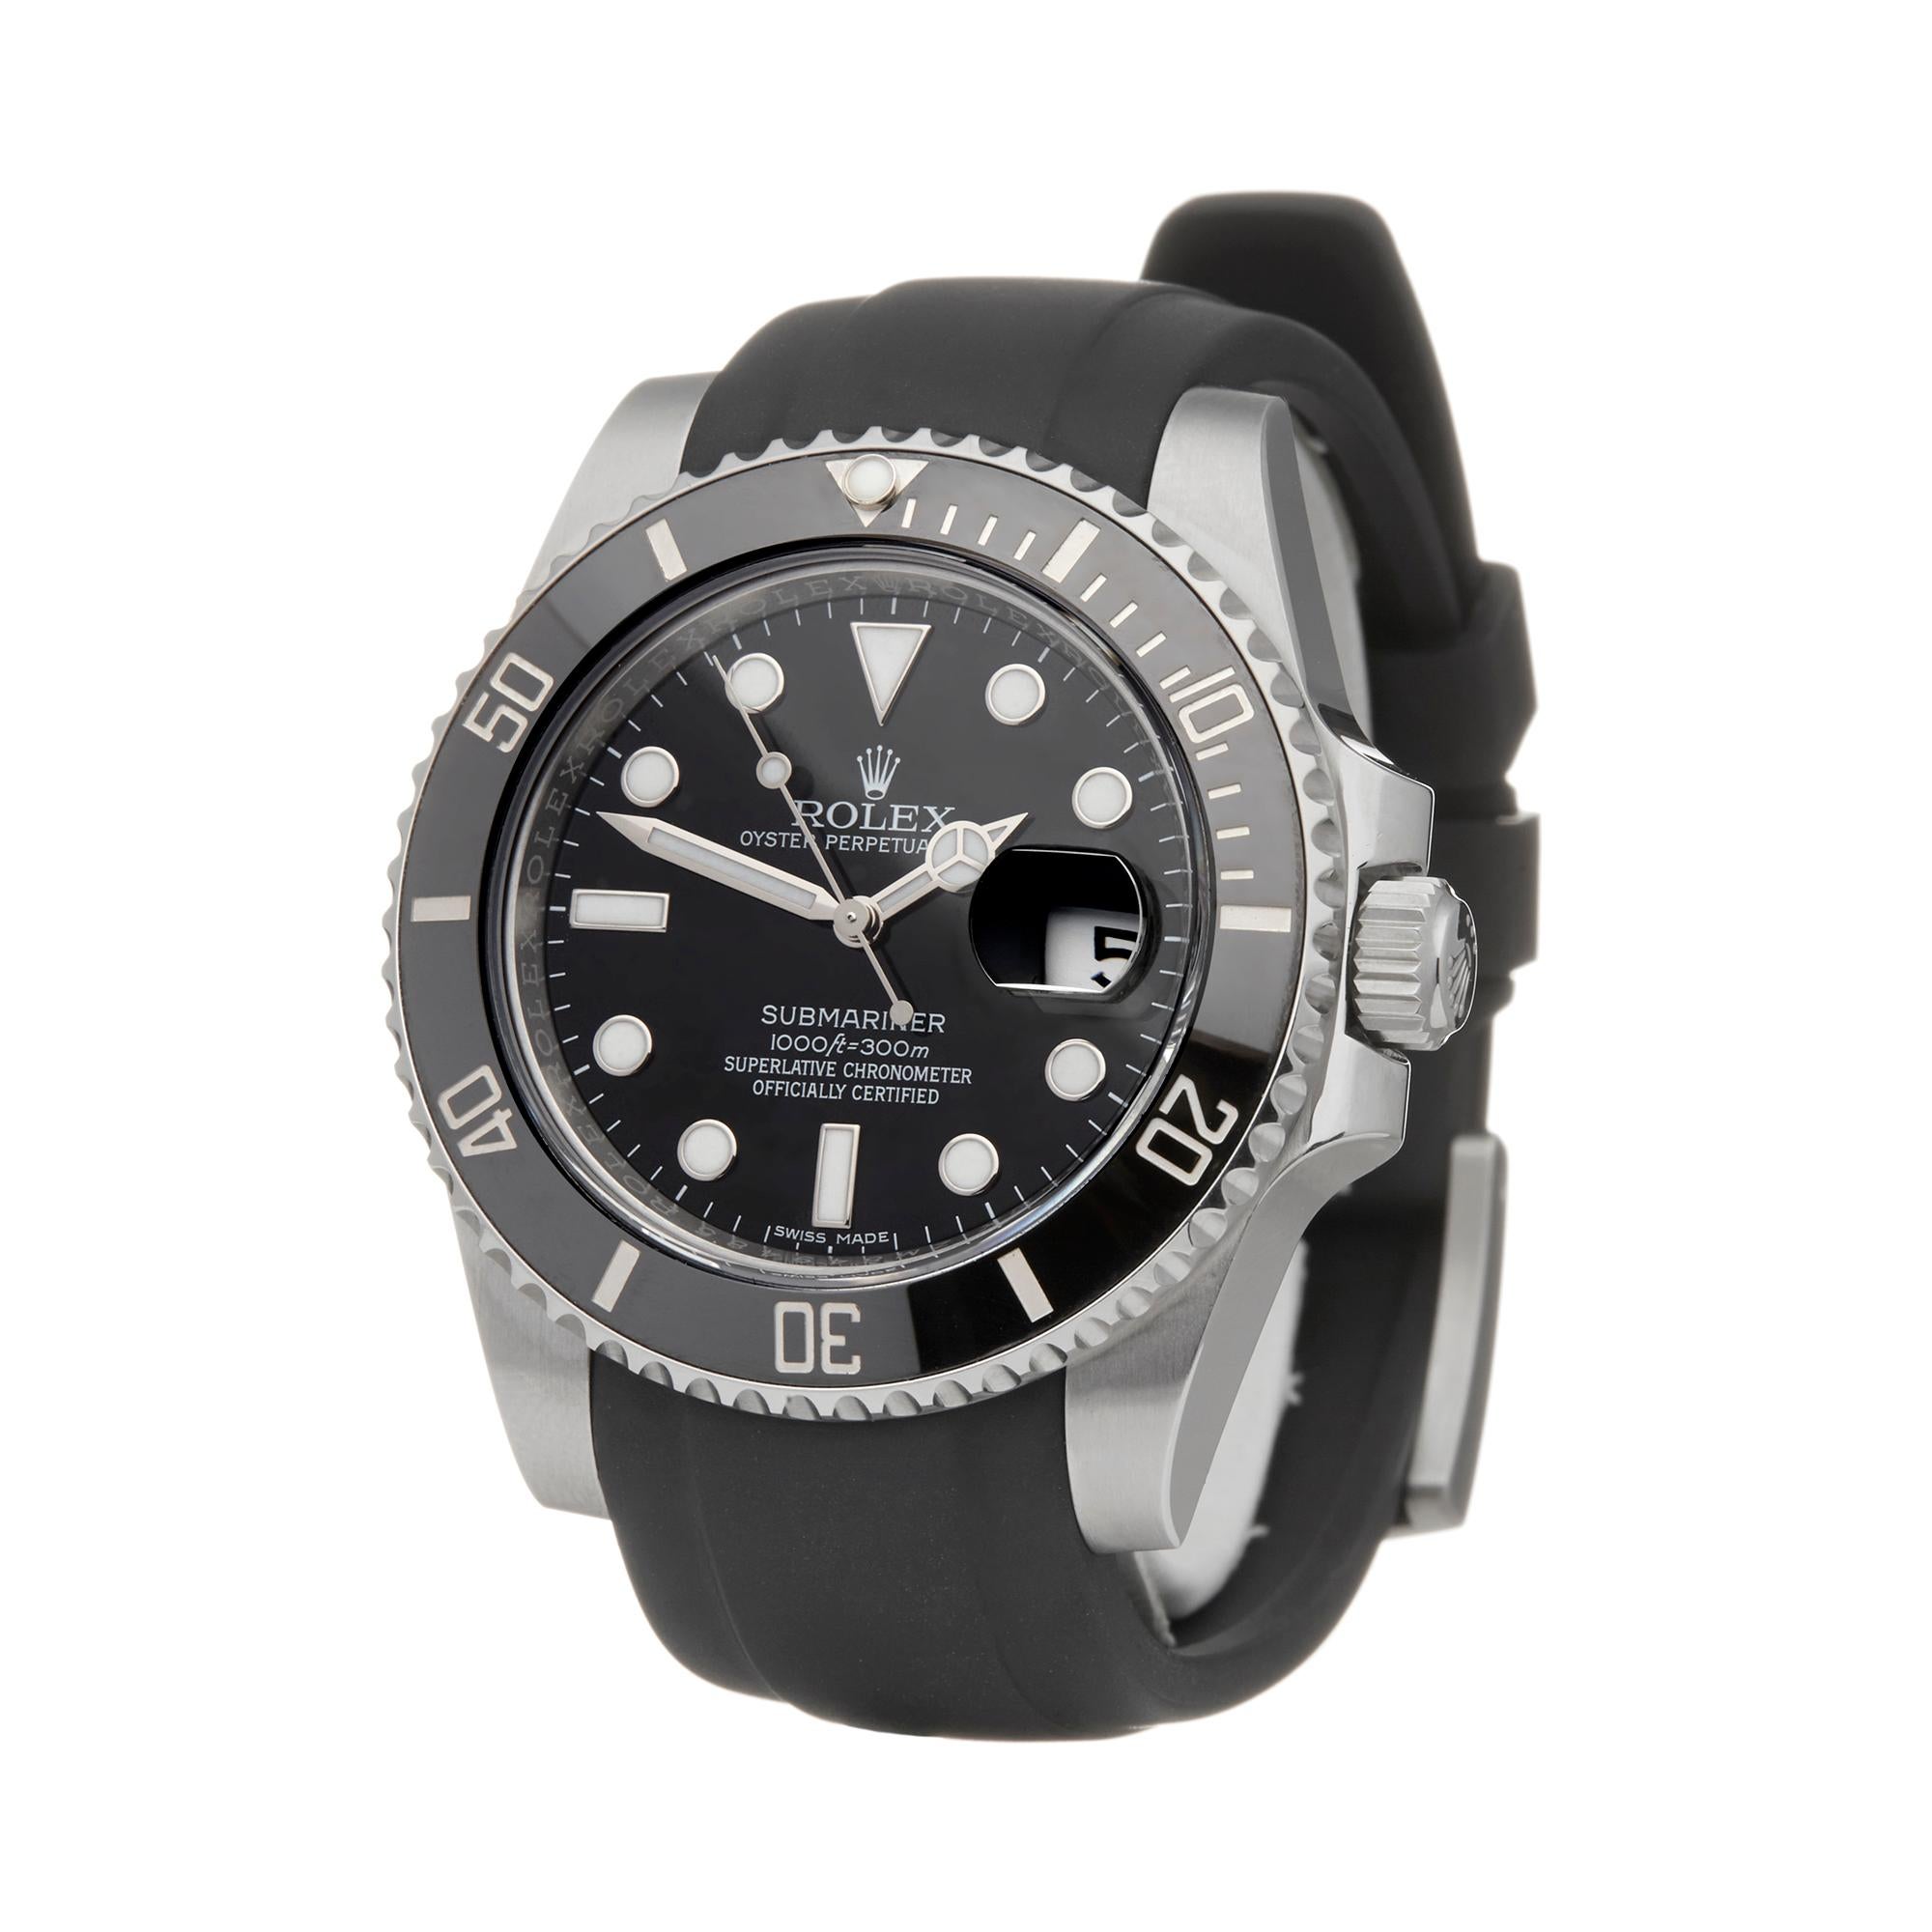 Ref: W5952
Manufacturer: Rolex
Model: Submariner
Model Ref: 116610LN
Age: 4th March 2016
Gender: Mens
Complete With: Box, Manuals & Guarantee
Dial: Black
Glass: Sapphire Crystal
Movement: Automatic
Water Resistance: To Manufacturers